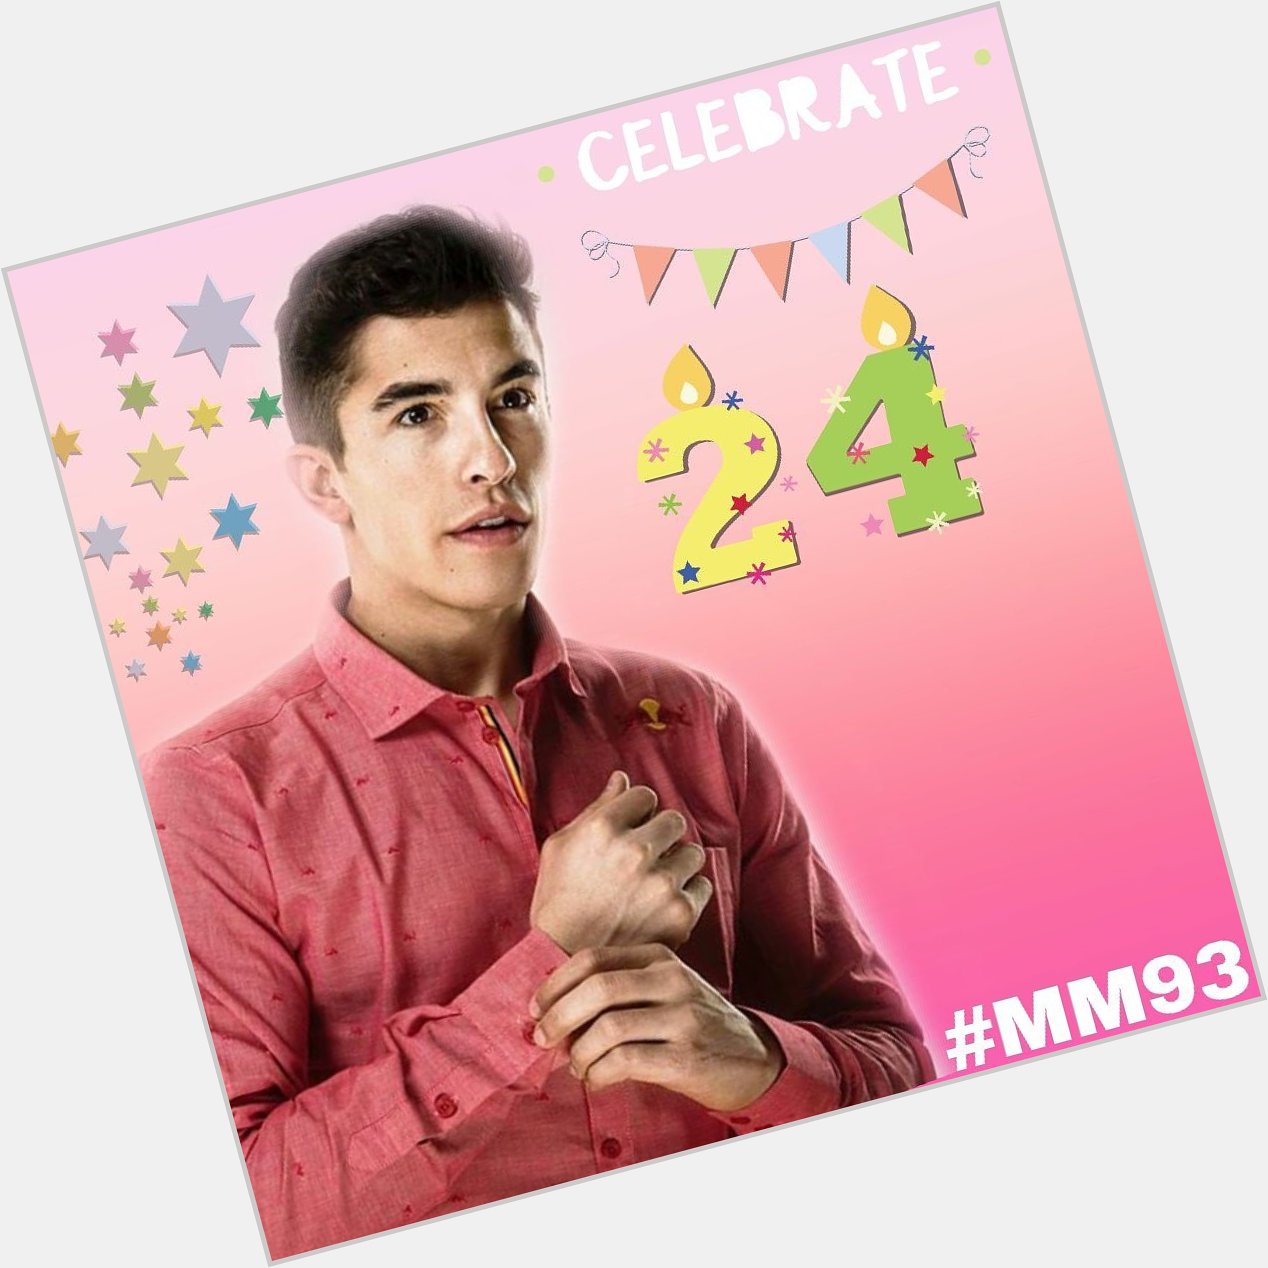 Happy Birthday Marc Marquez   Wiss U All The Best For You 